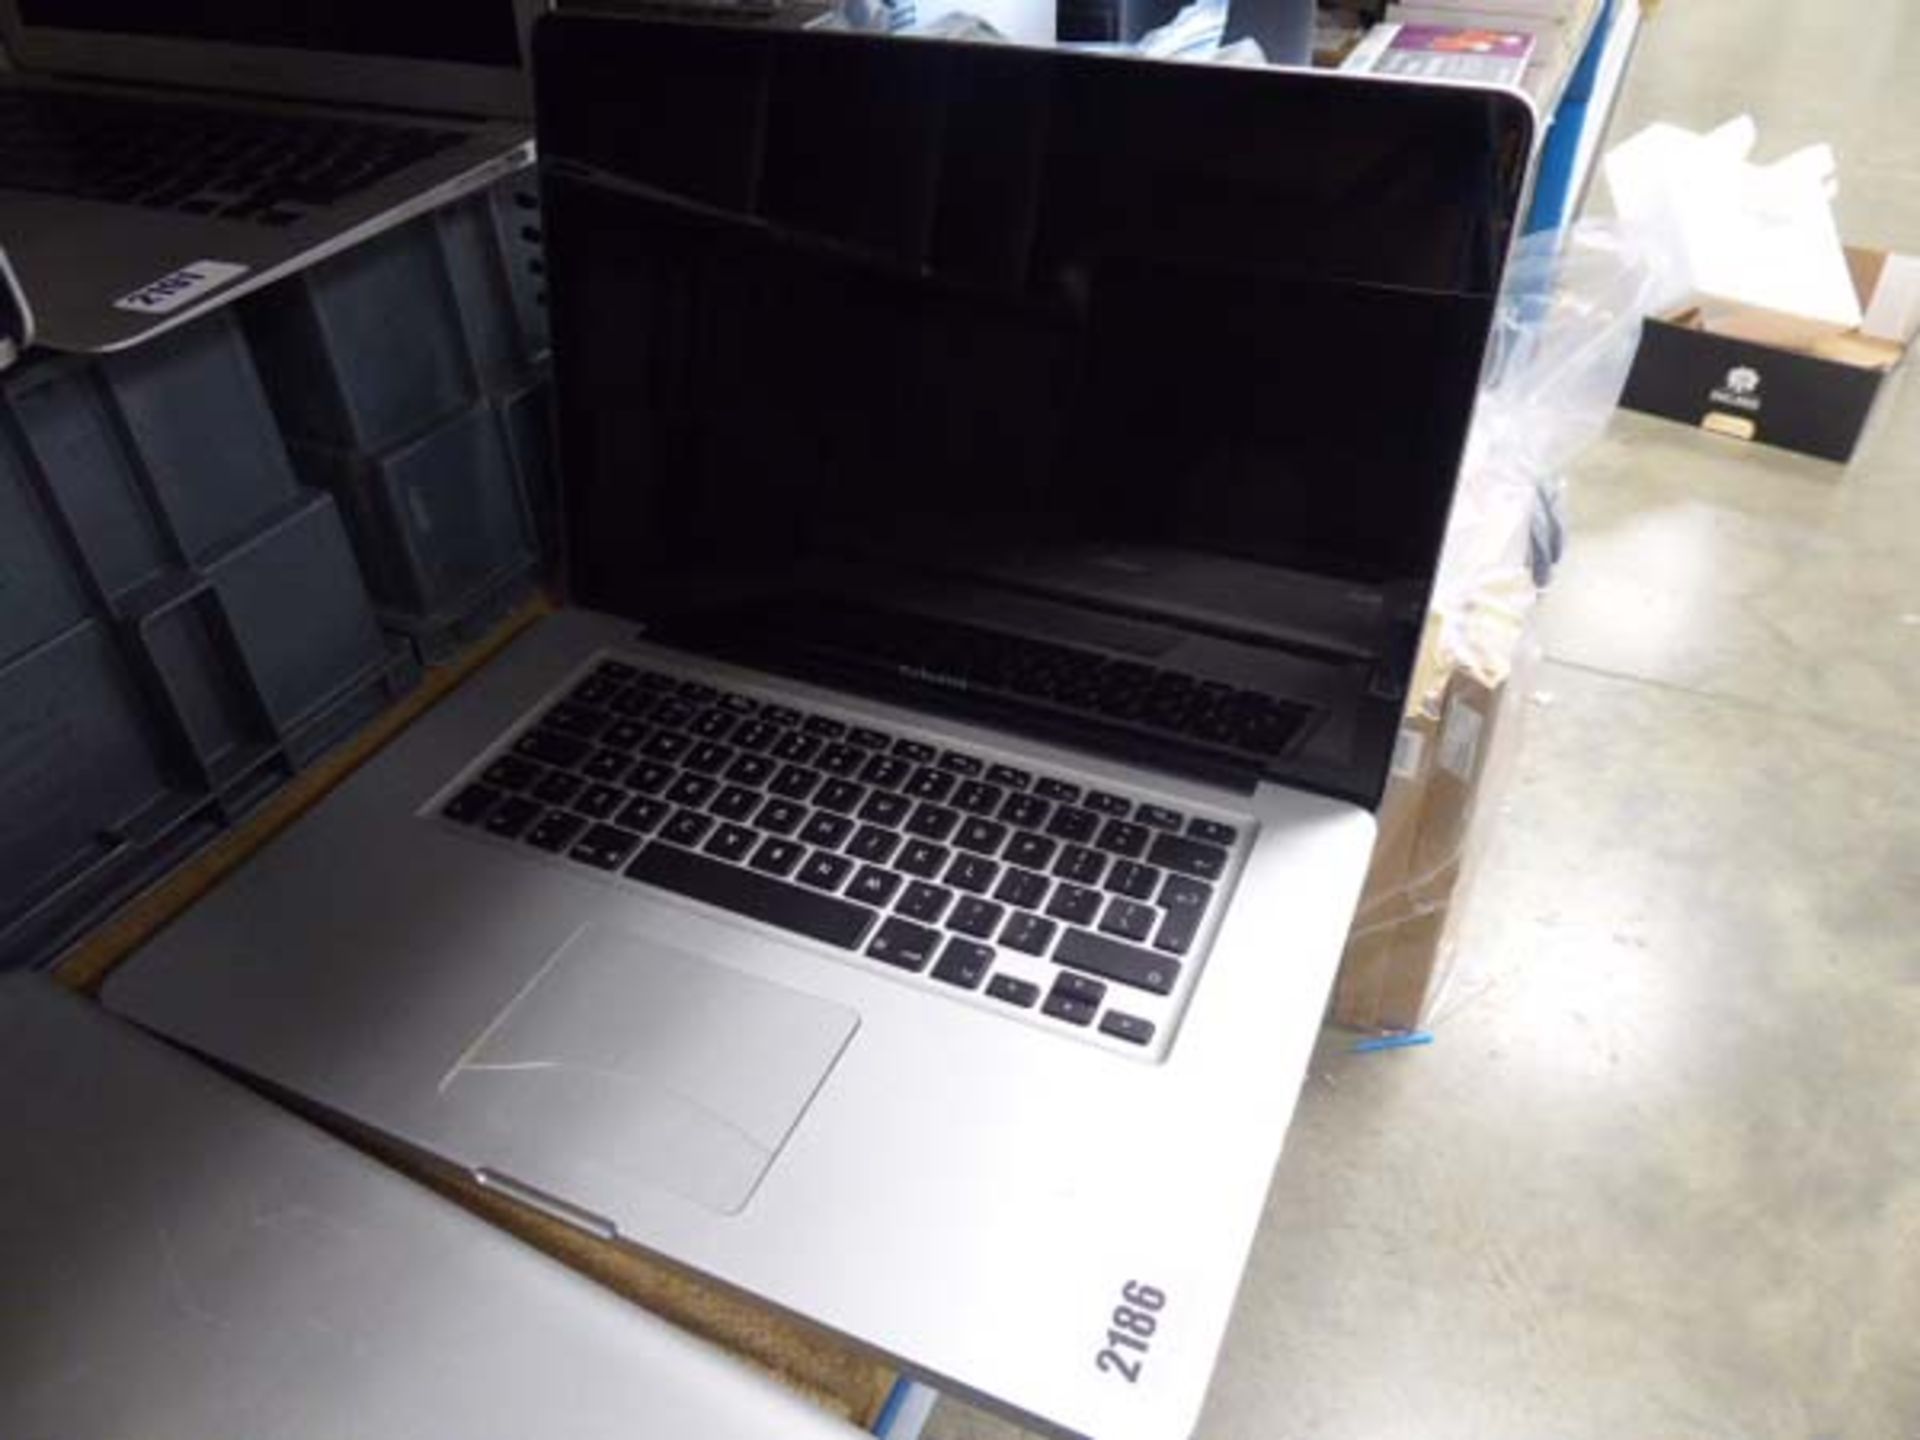 Apple Mac Book Pro model A1286 (2010) with cracked track pad (sold for spare and repair)